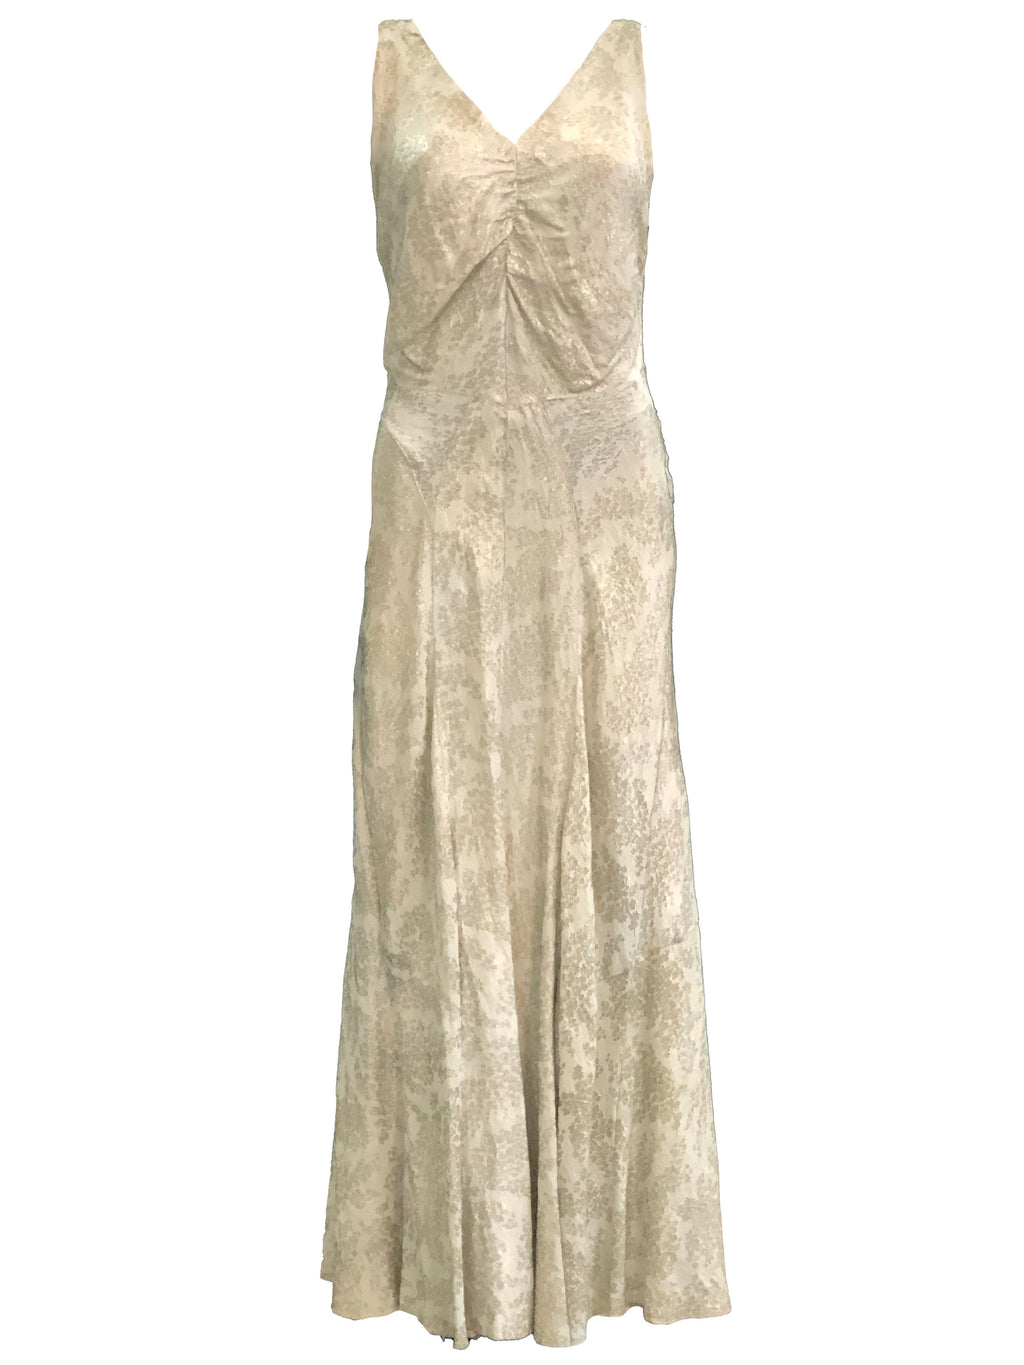 30s Gold Lame Gown with Full Length Slip FRONT 1 of 4